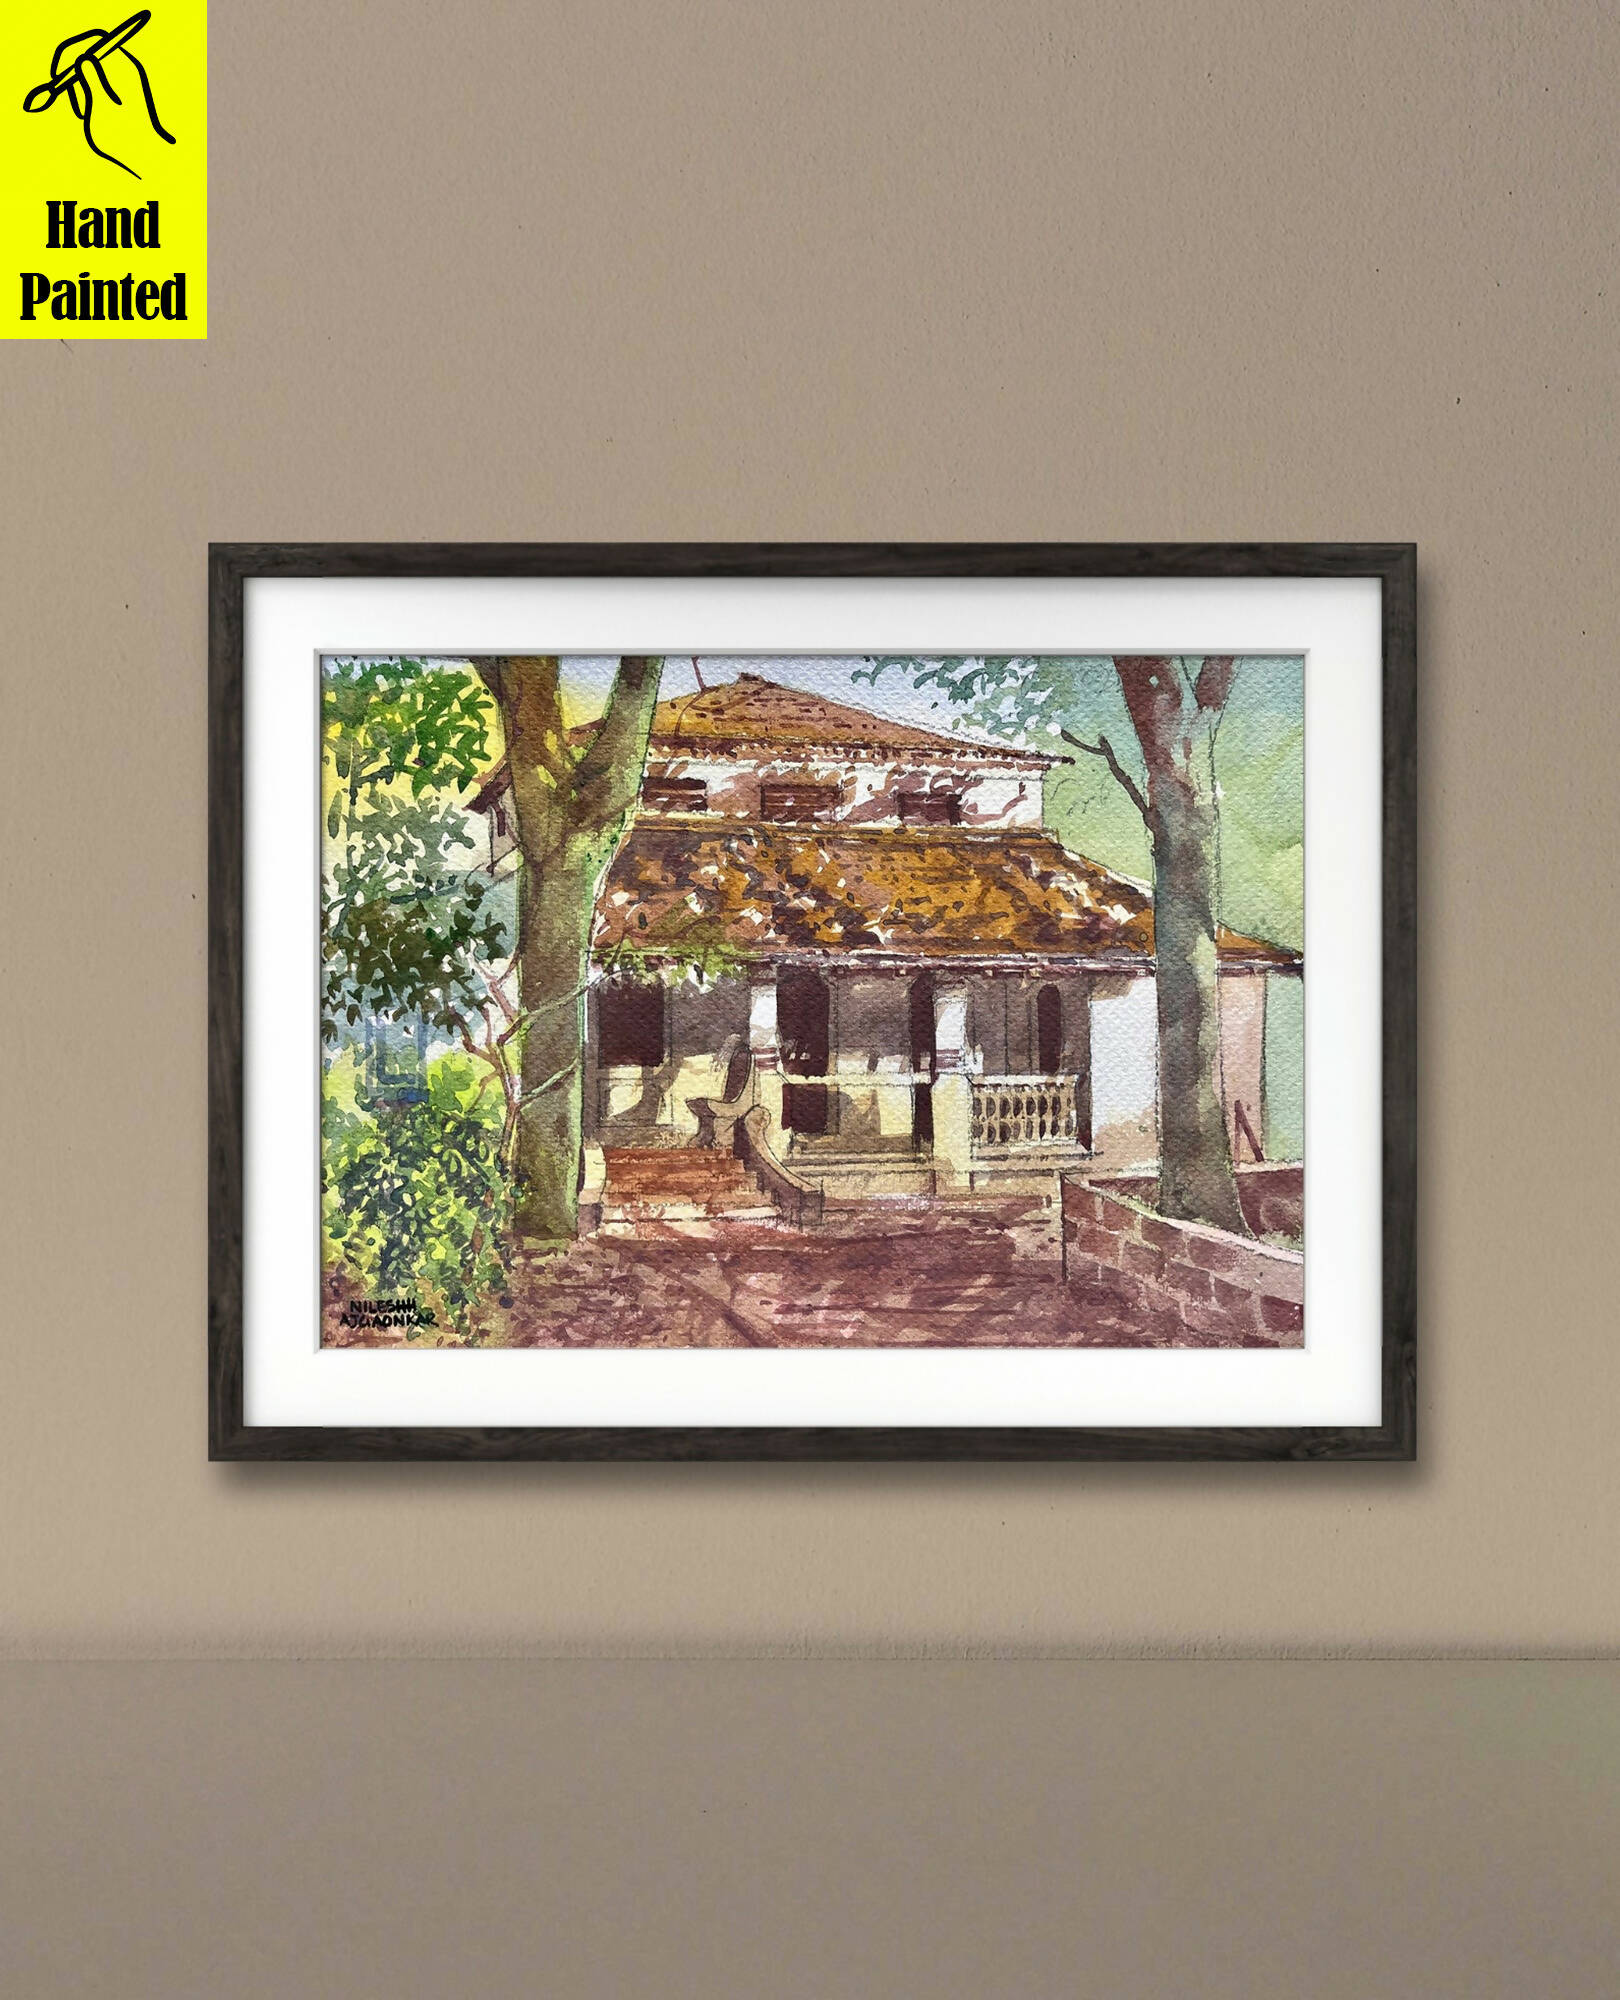 Title: Goan heritage house with two jackfruit trees